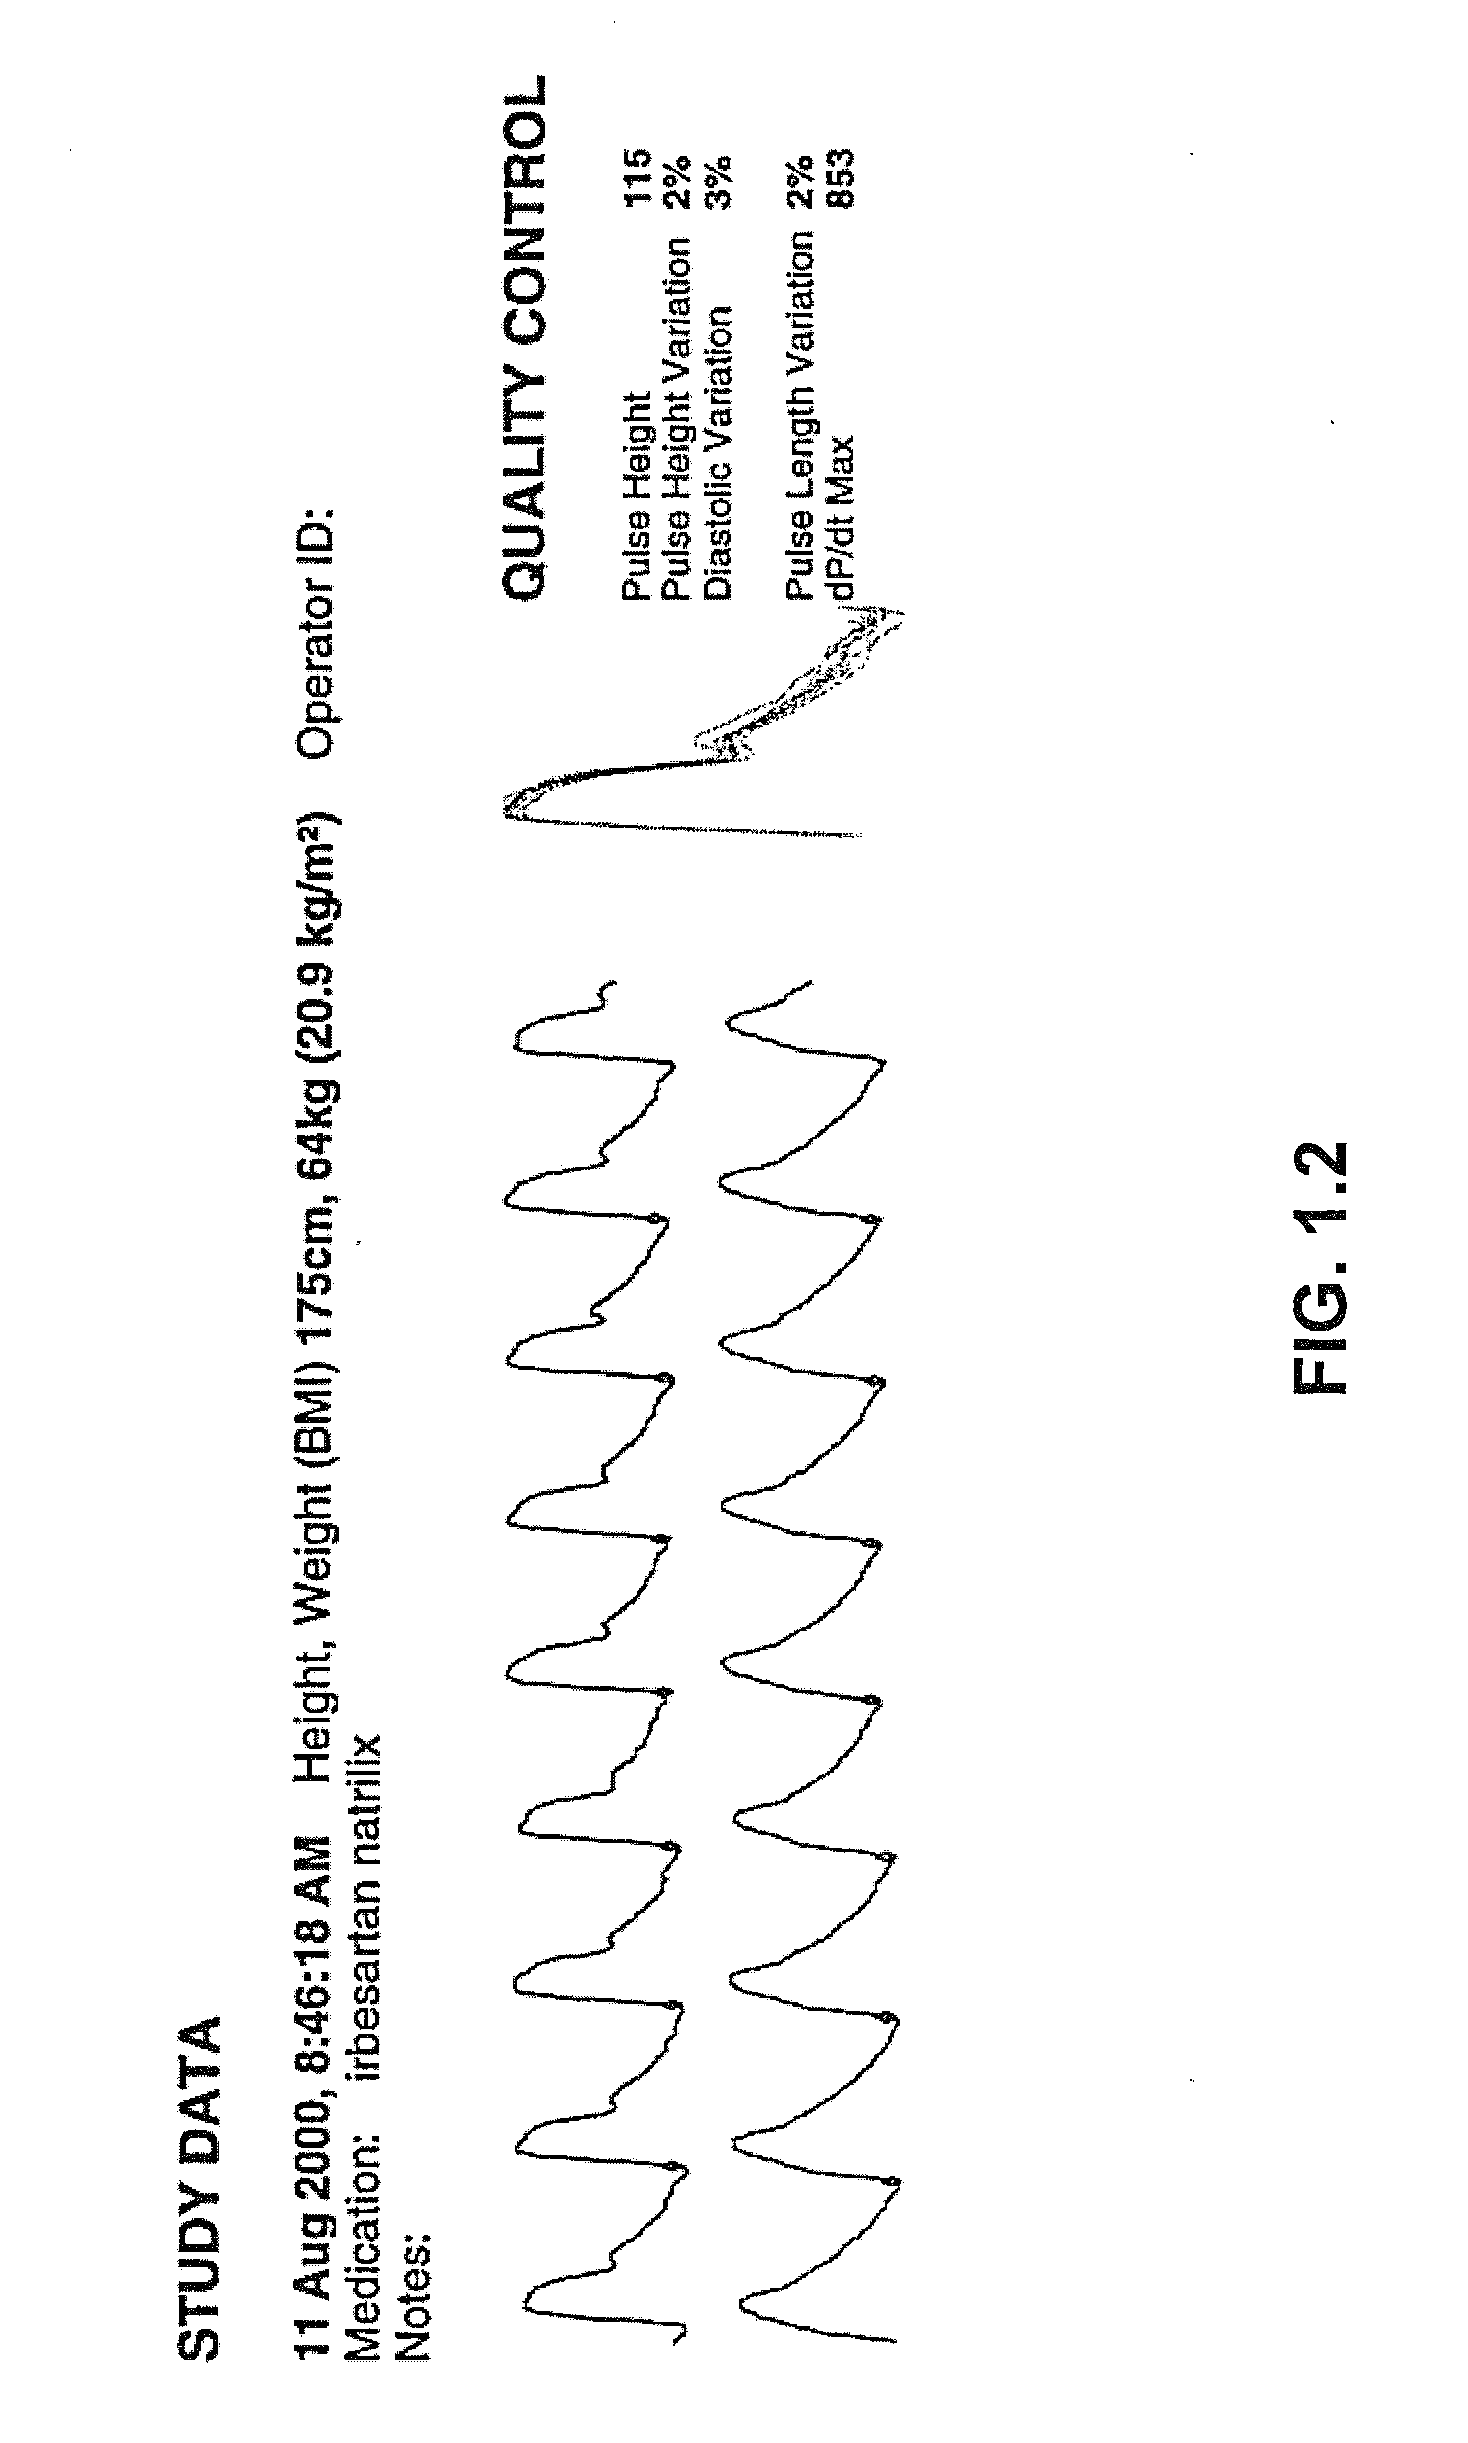 Cardiovascular pulse wave analysis method and system